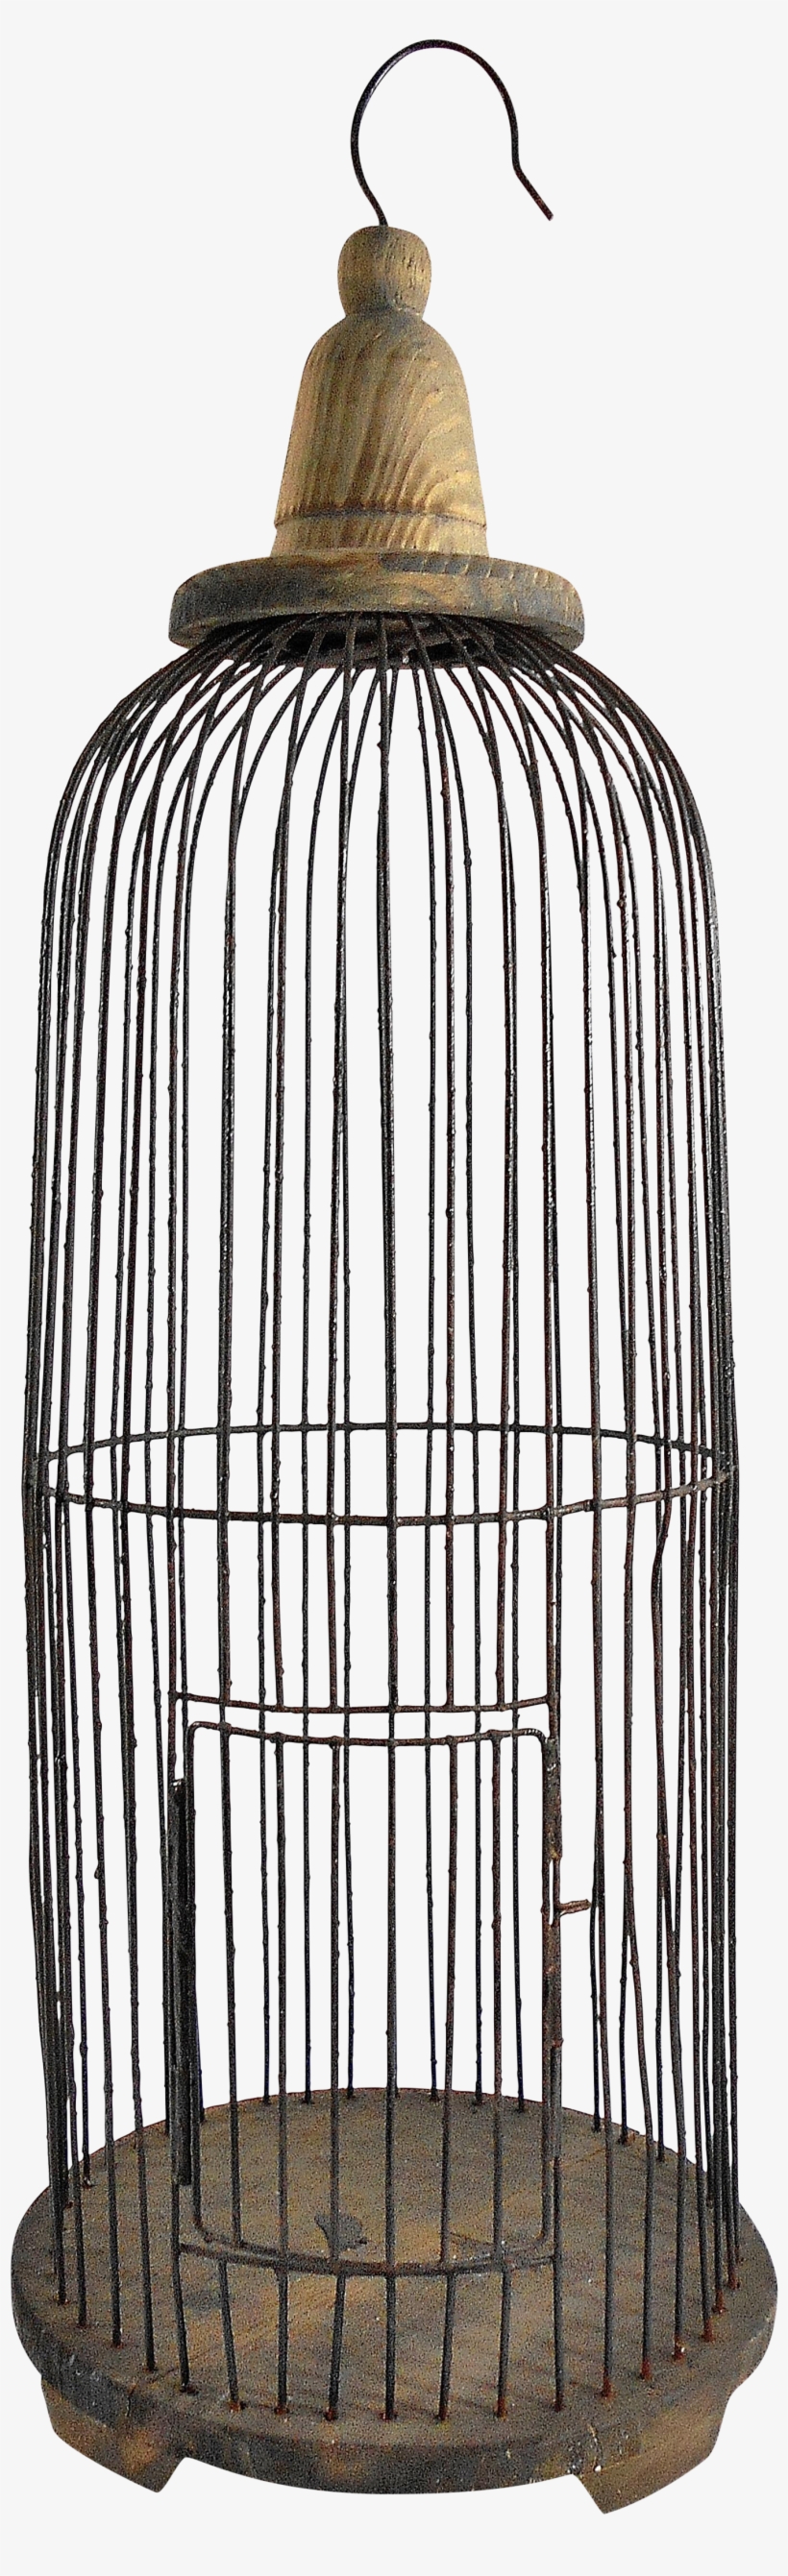 Decorative Round Wire Hanging Birdcage - Electrical Wiring, transparent png #1082528